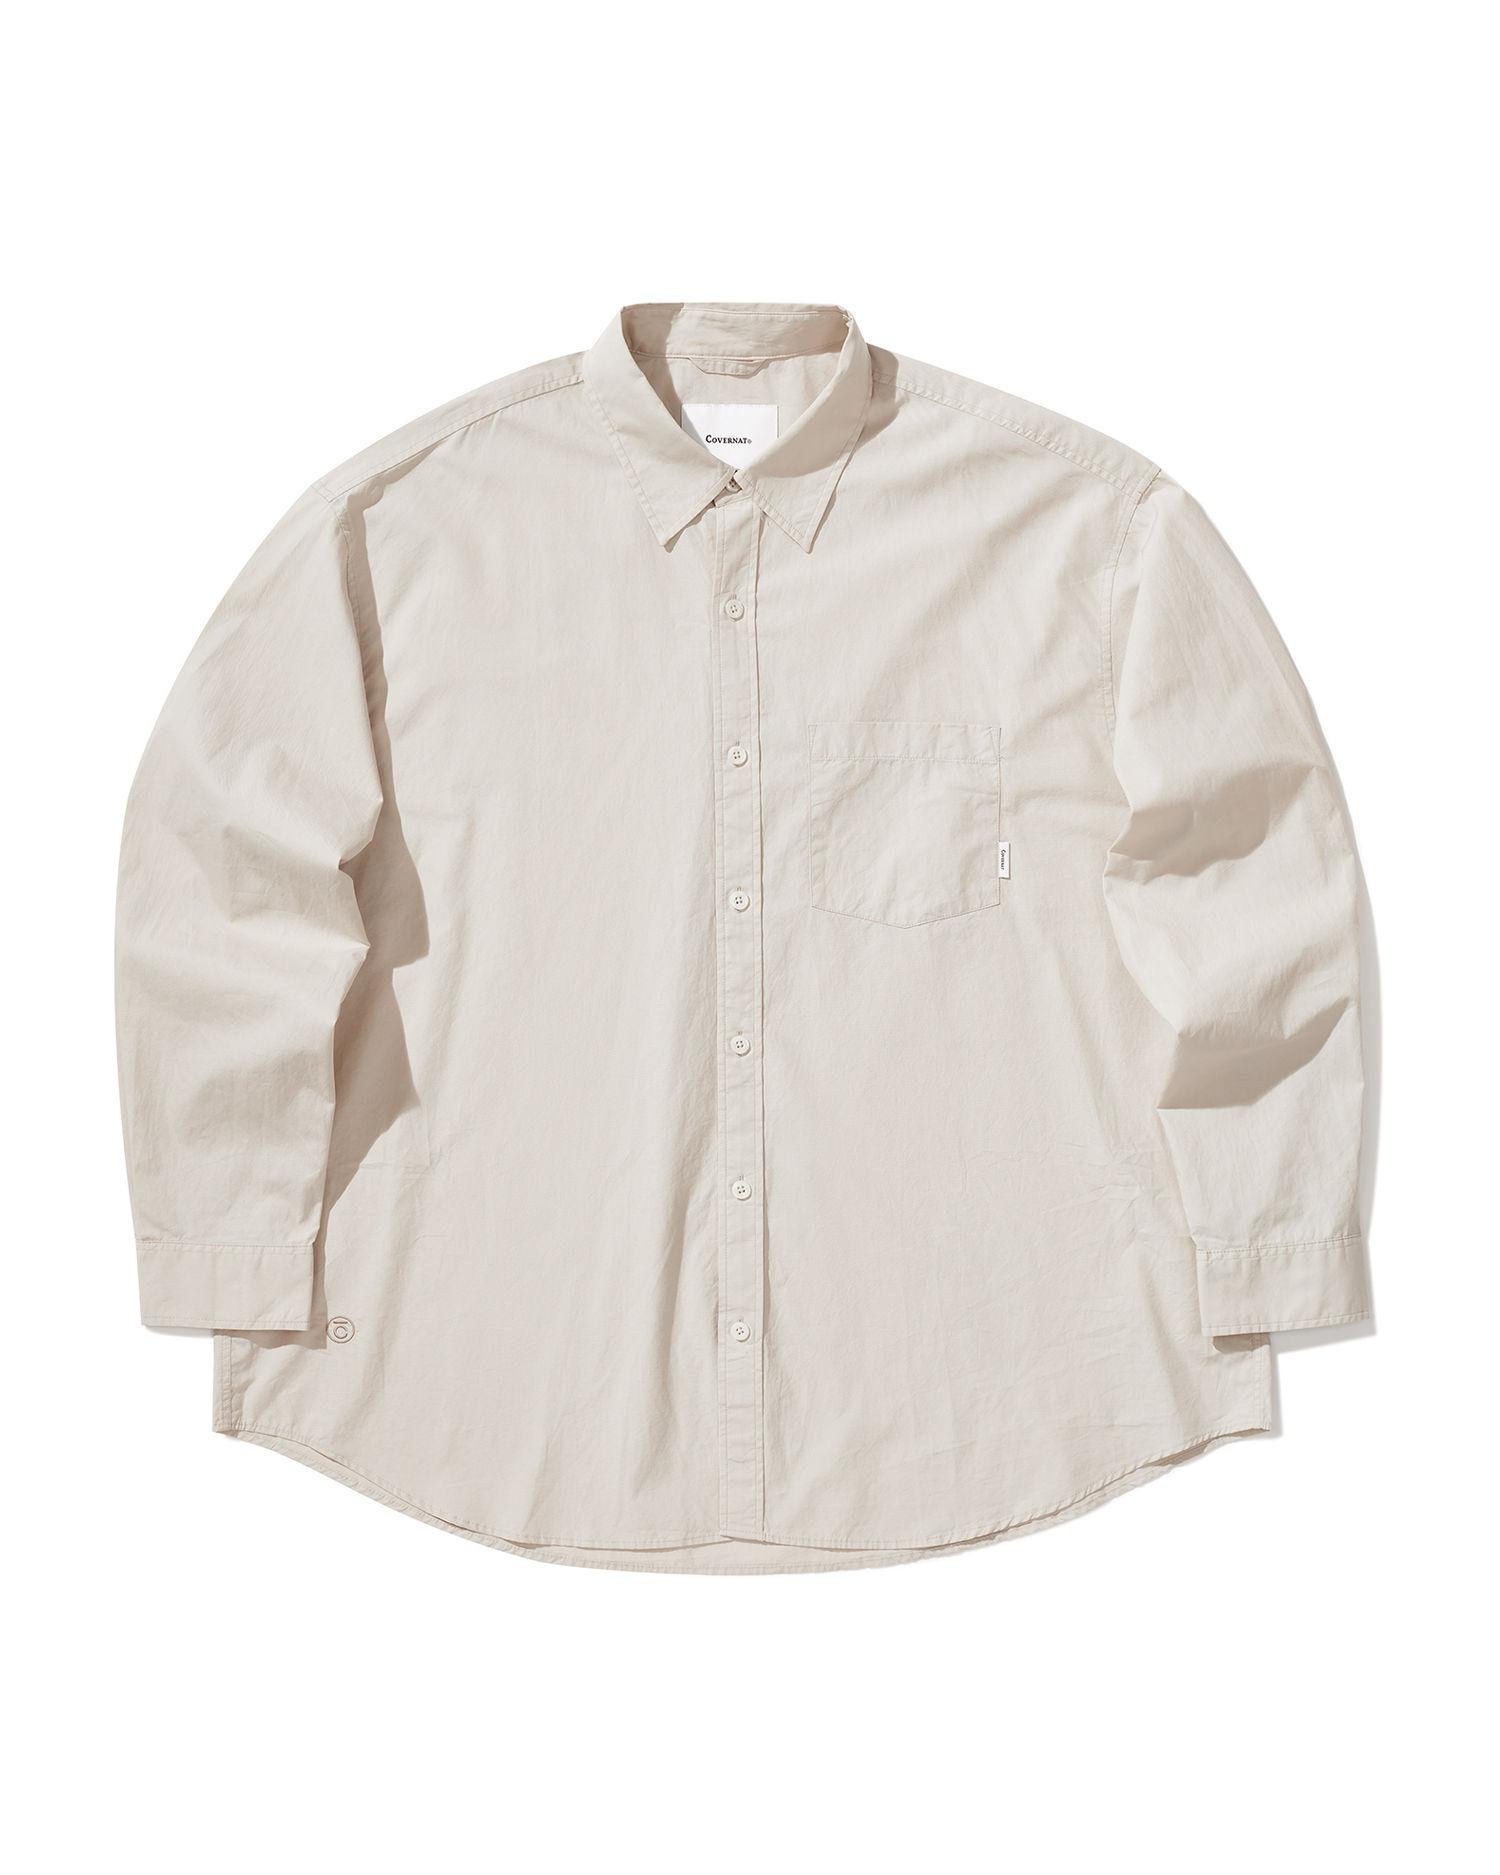 Chest pocket relaxed shirt by COVERNAT